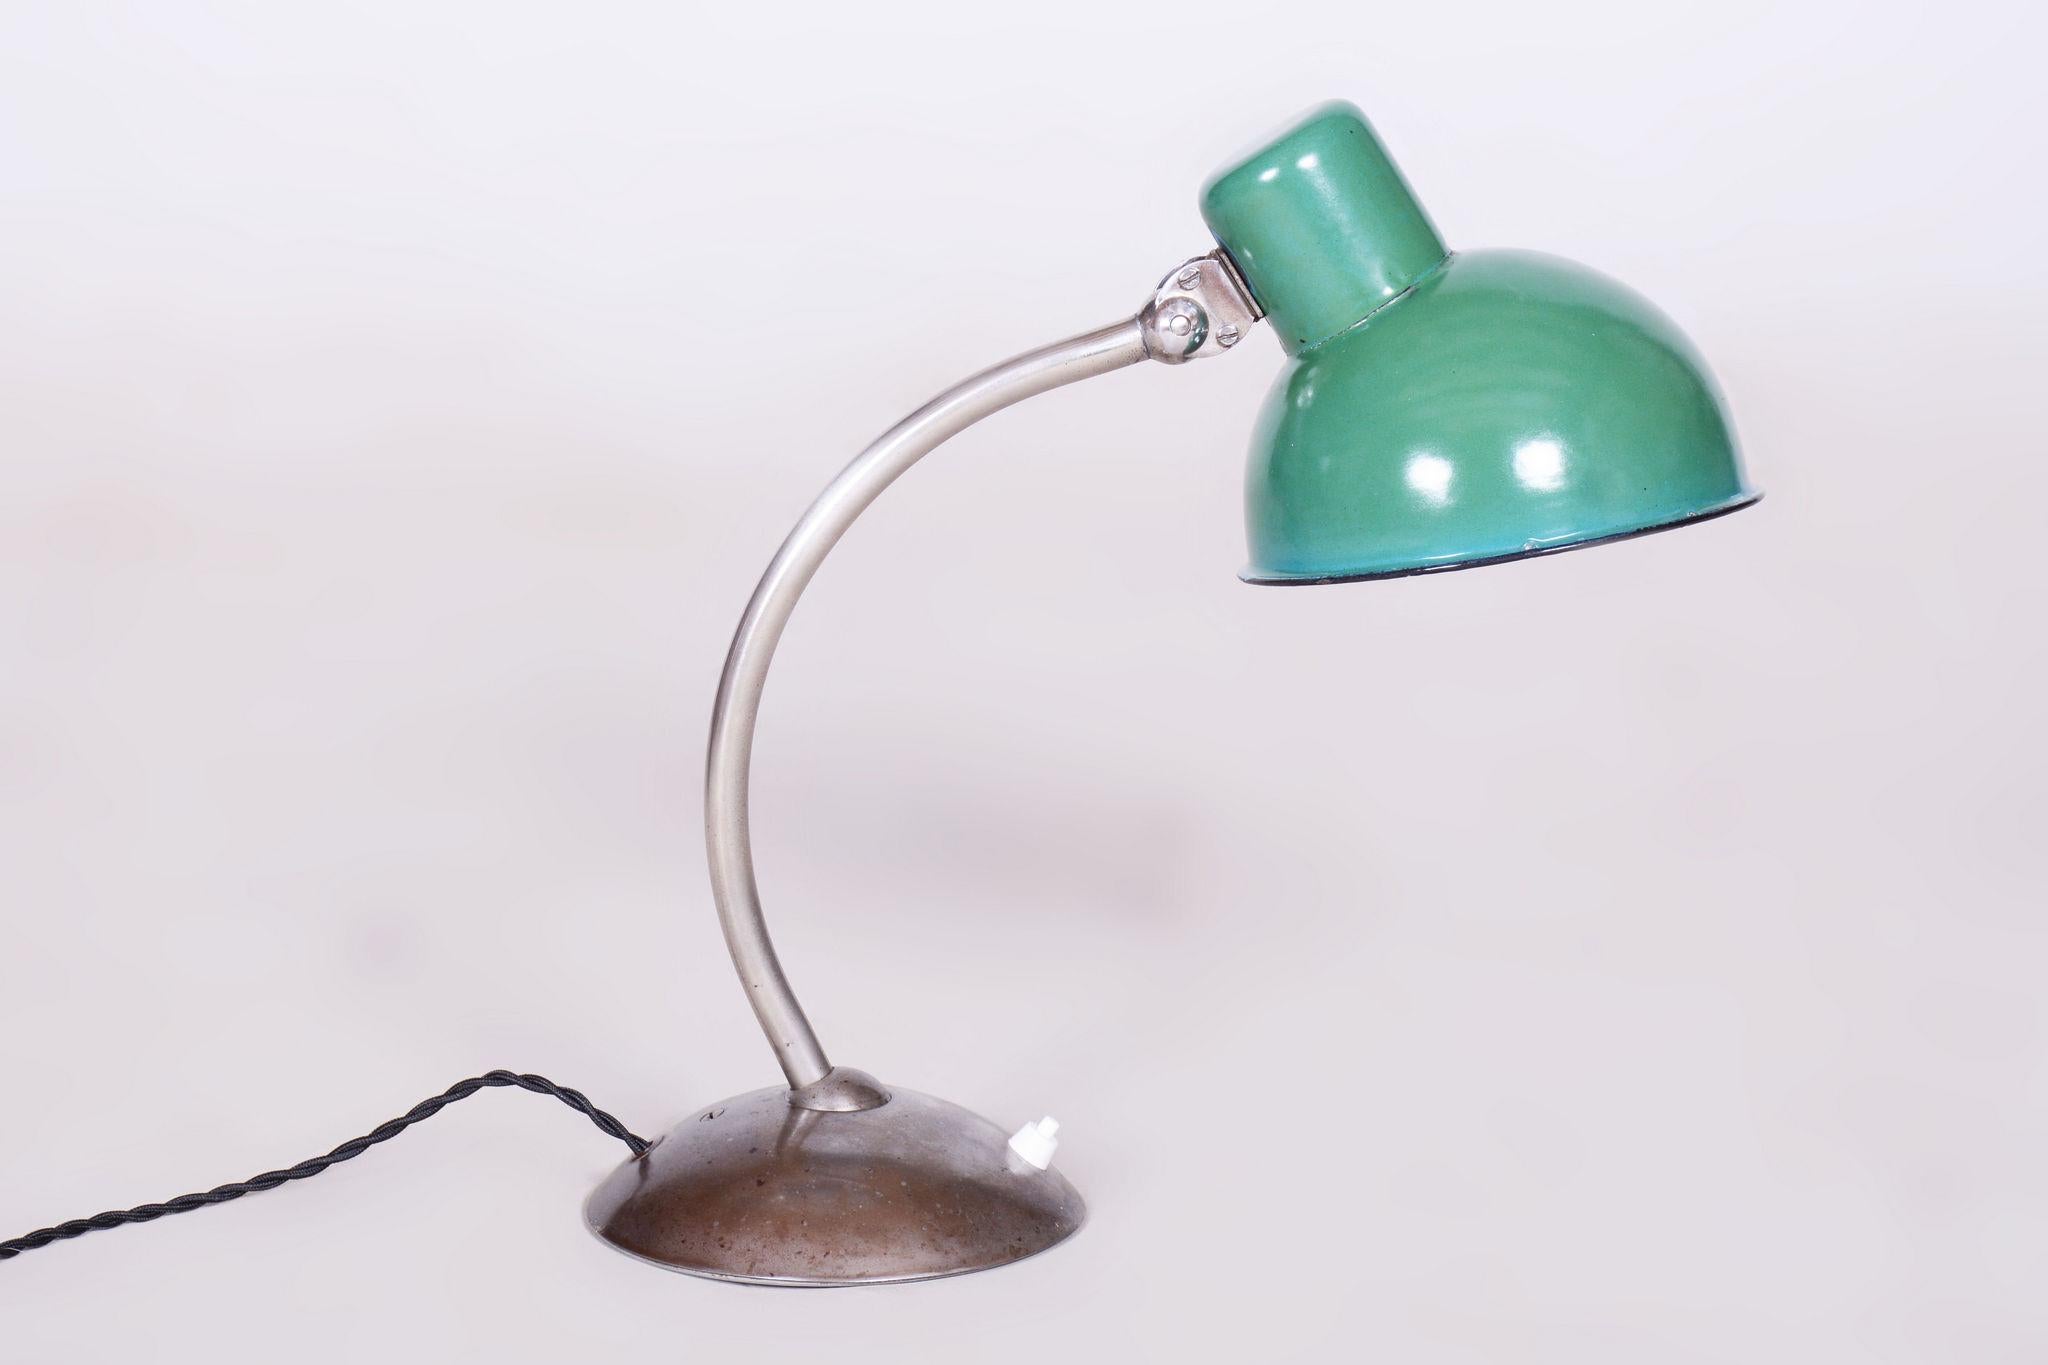 Restored Bauhaus Table Lamp With New Electrification.

Material: Chrome-plated Steel, Enameled Metal
Source: Czechia (Czechoslovakia)
Period: 1930-1939
New electrification.
Enameled metal light shade.
The chrome parts have been cleaned and